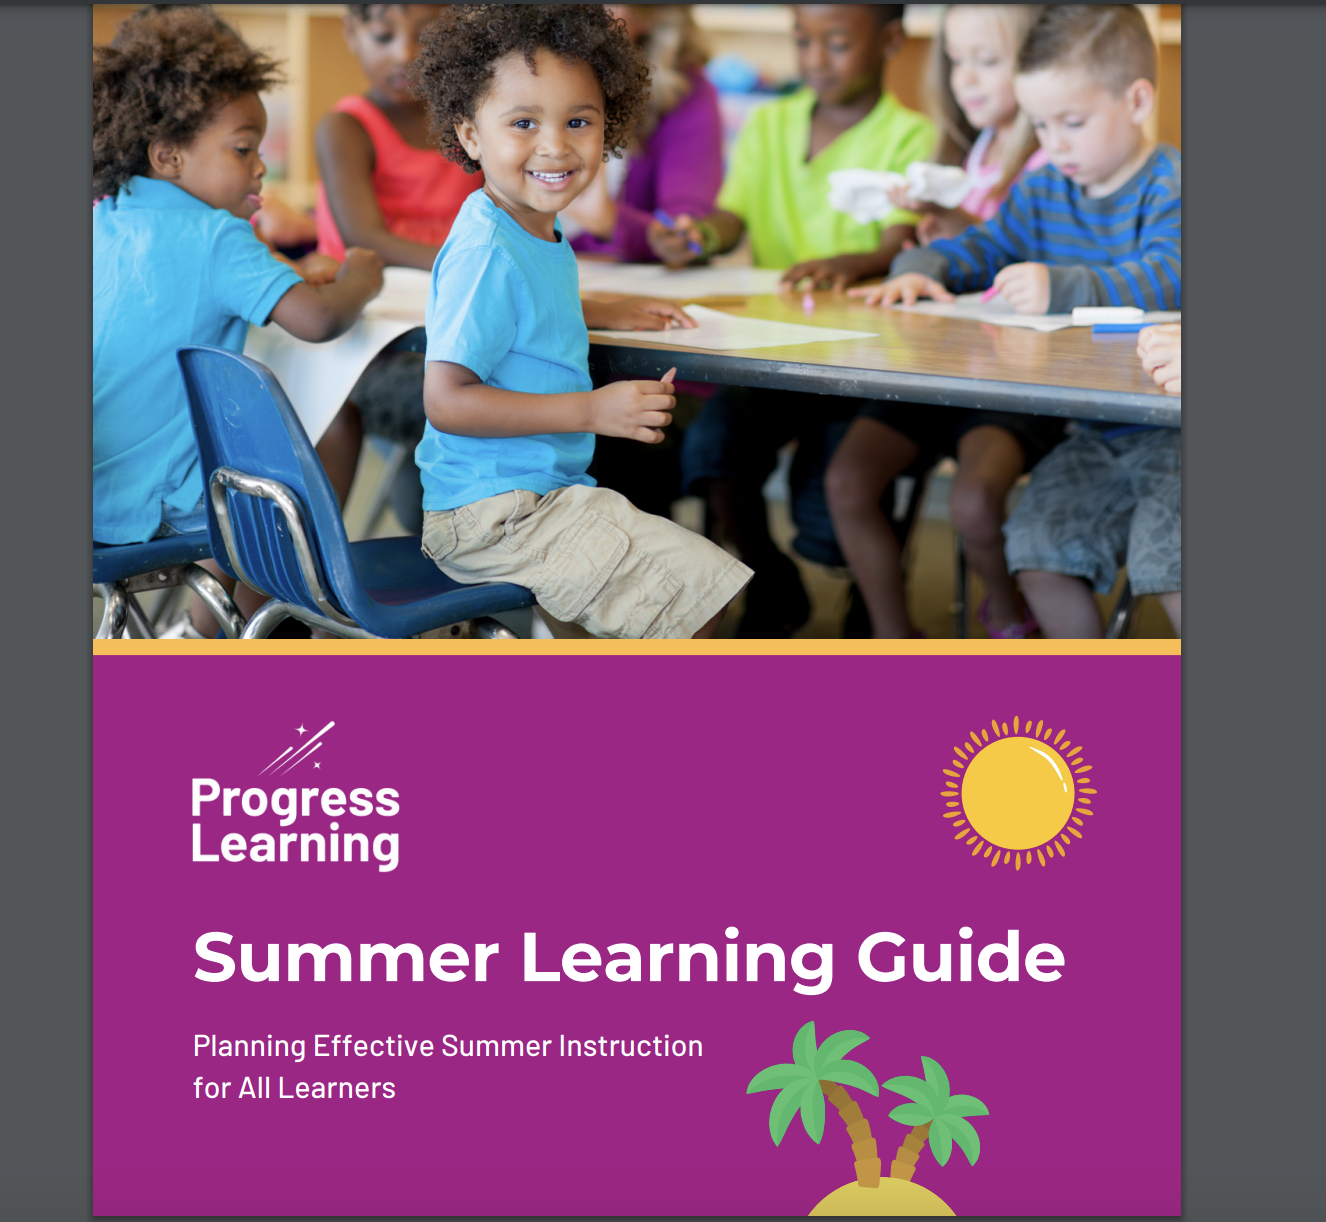 Featured Image for Progress Learning’s Summer Learning Guide: Free eBook Download